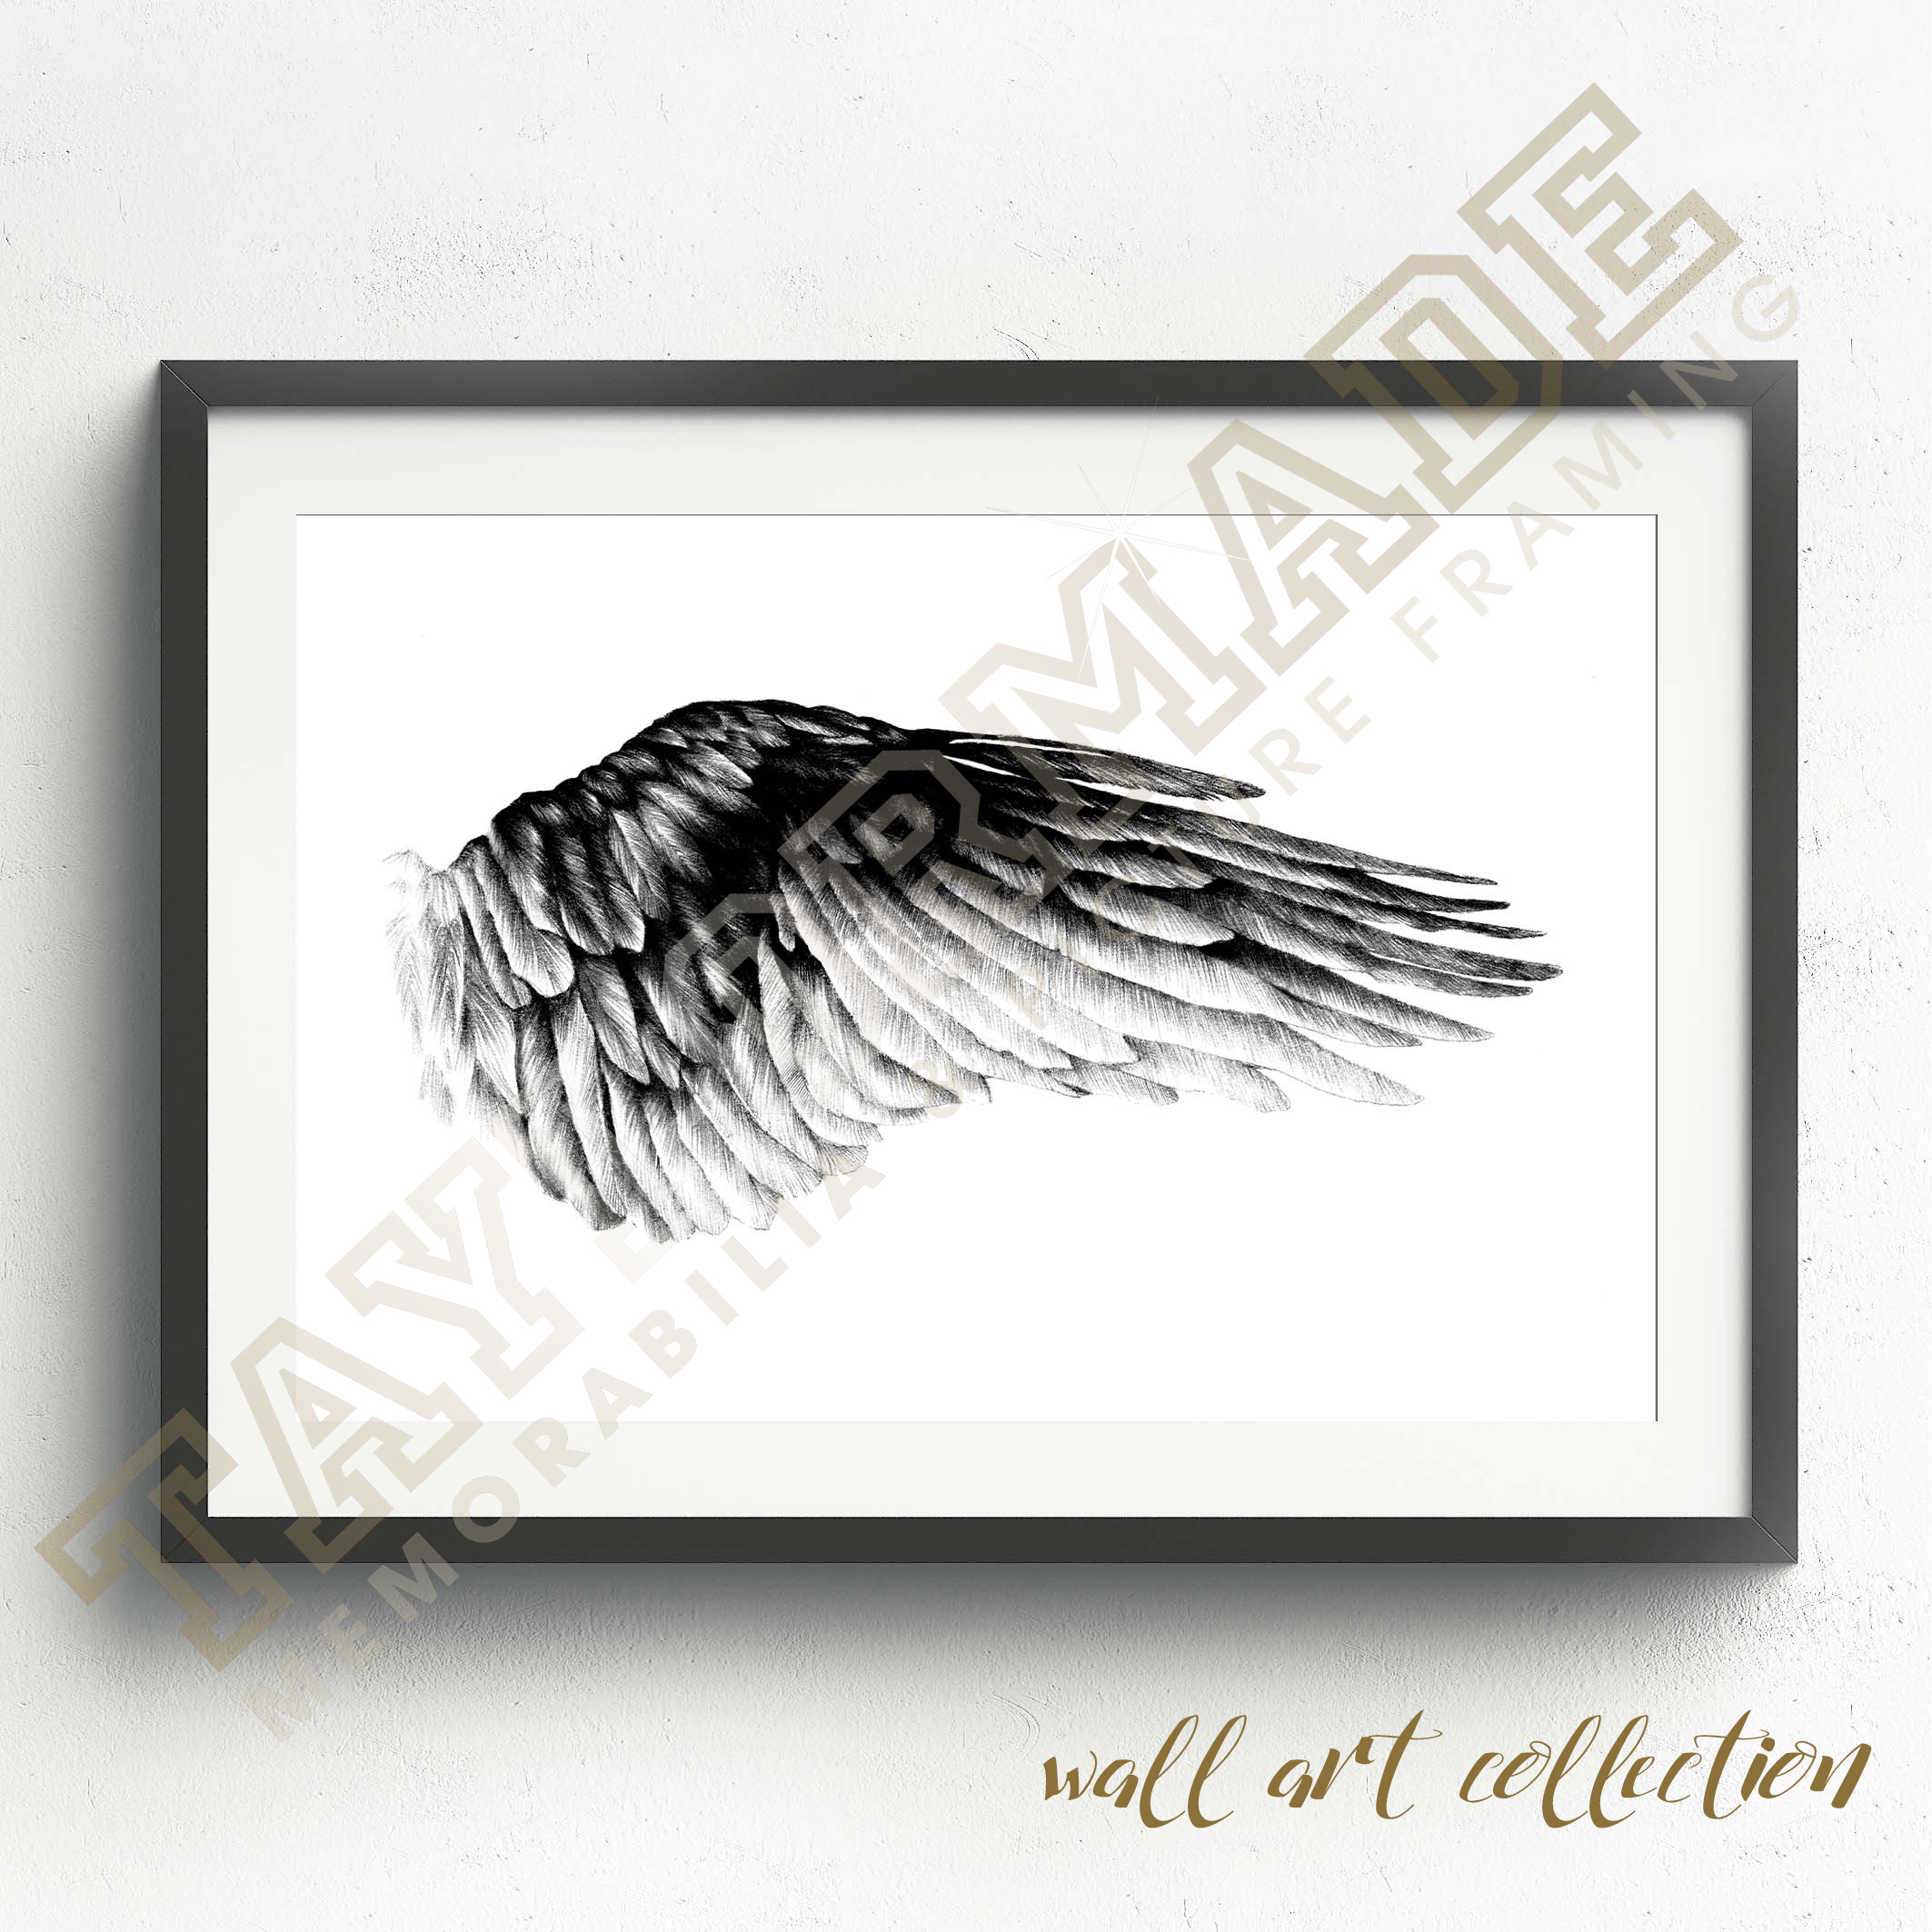 Wall Art Collection – Ikaros Wing